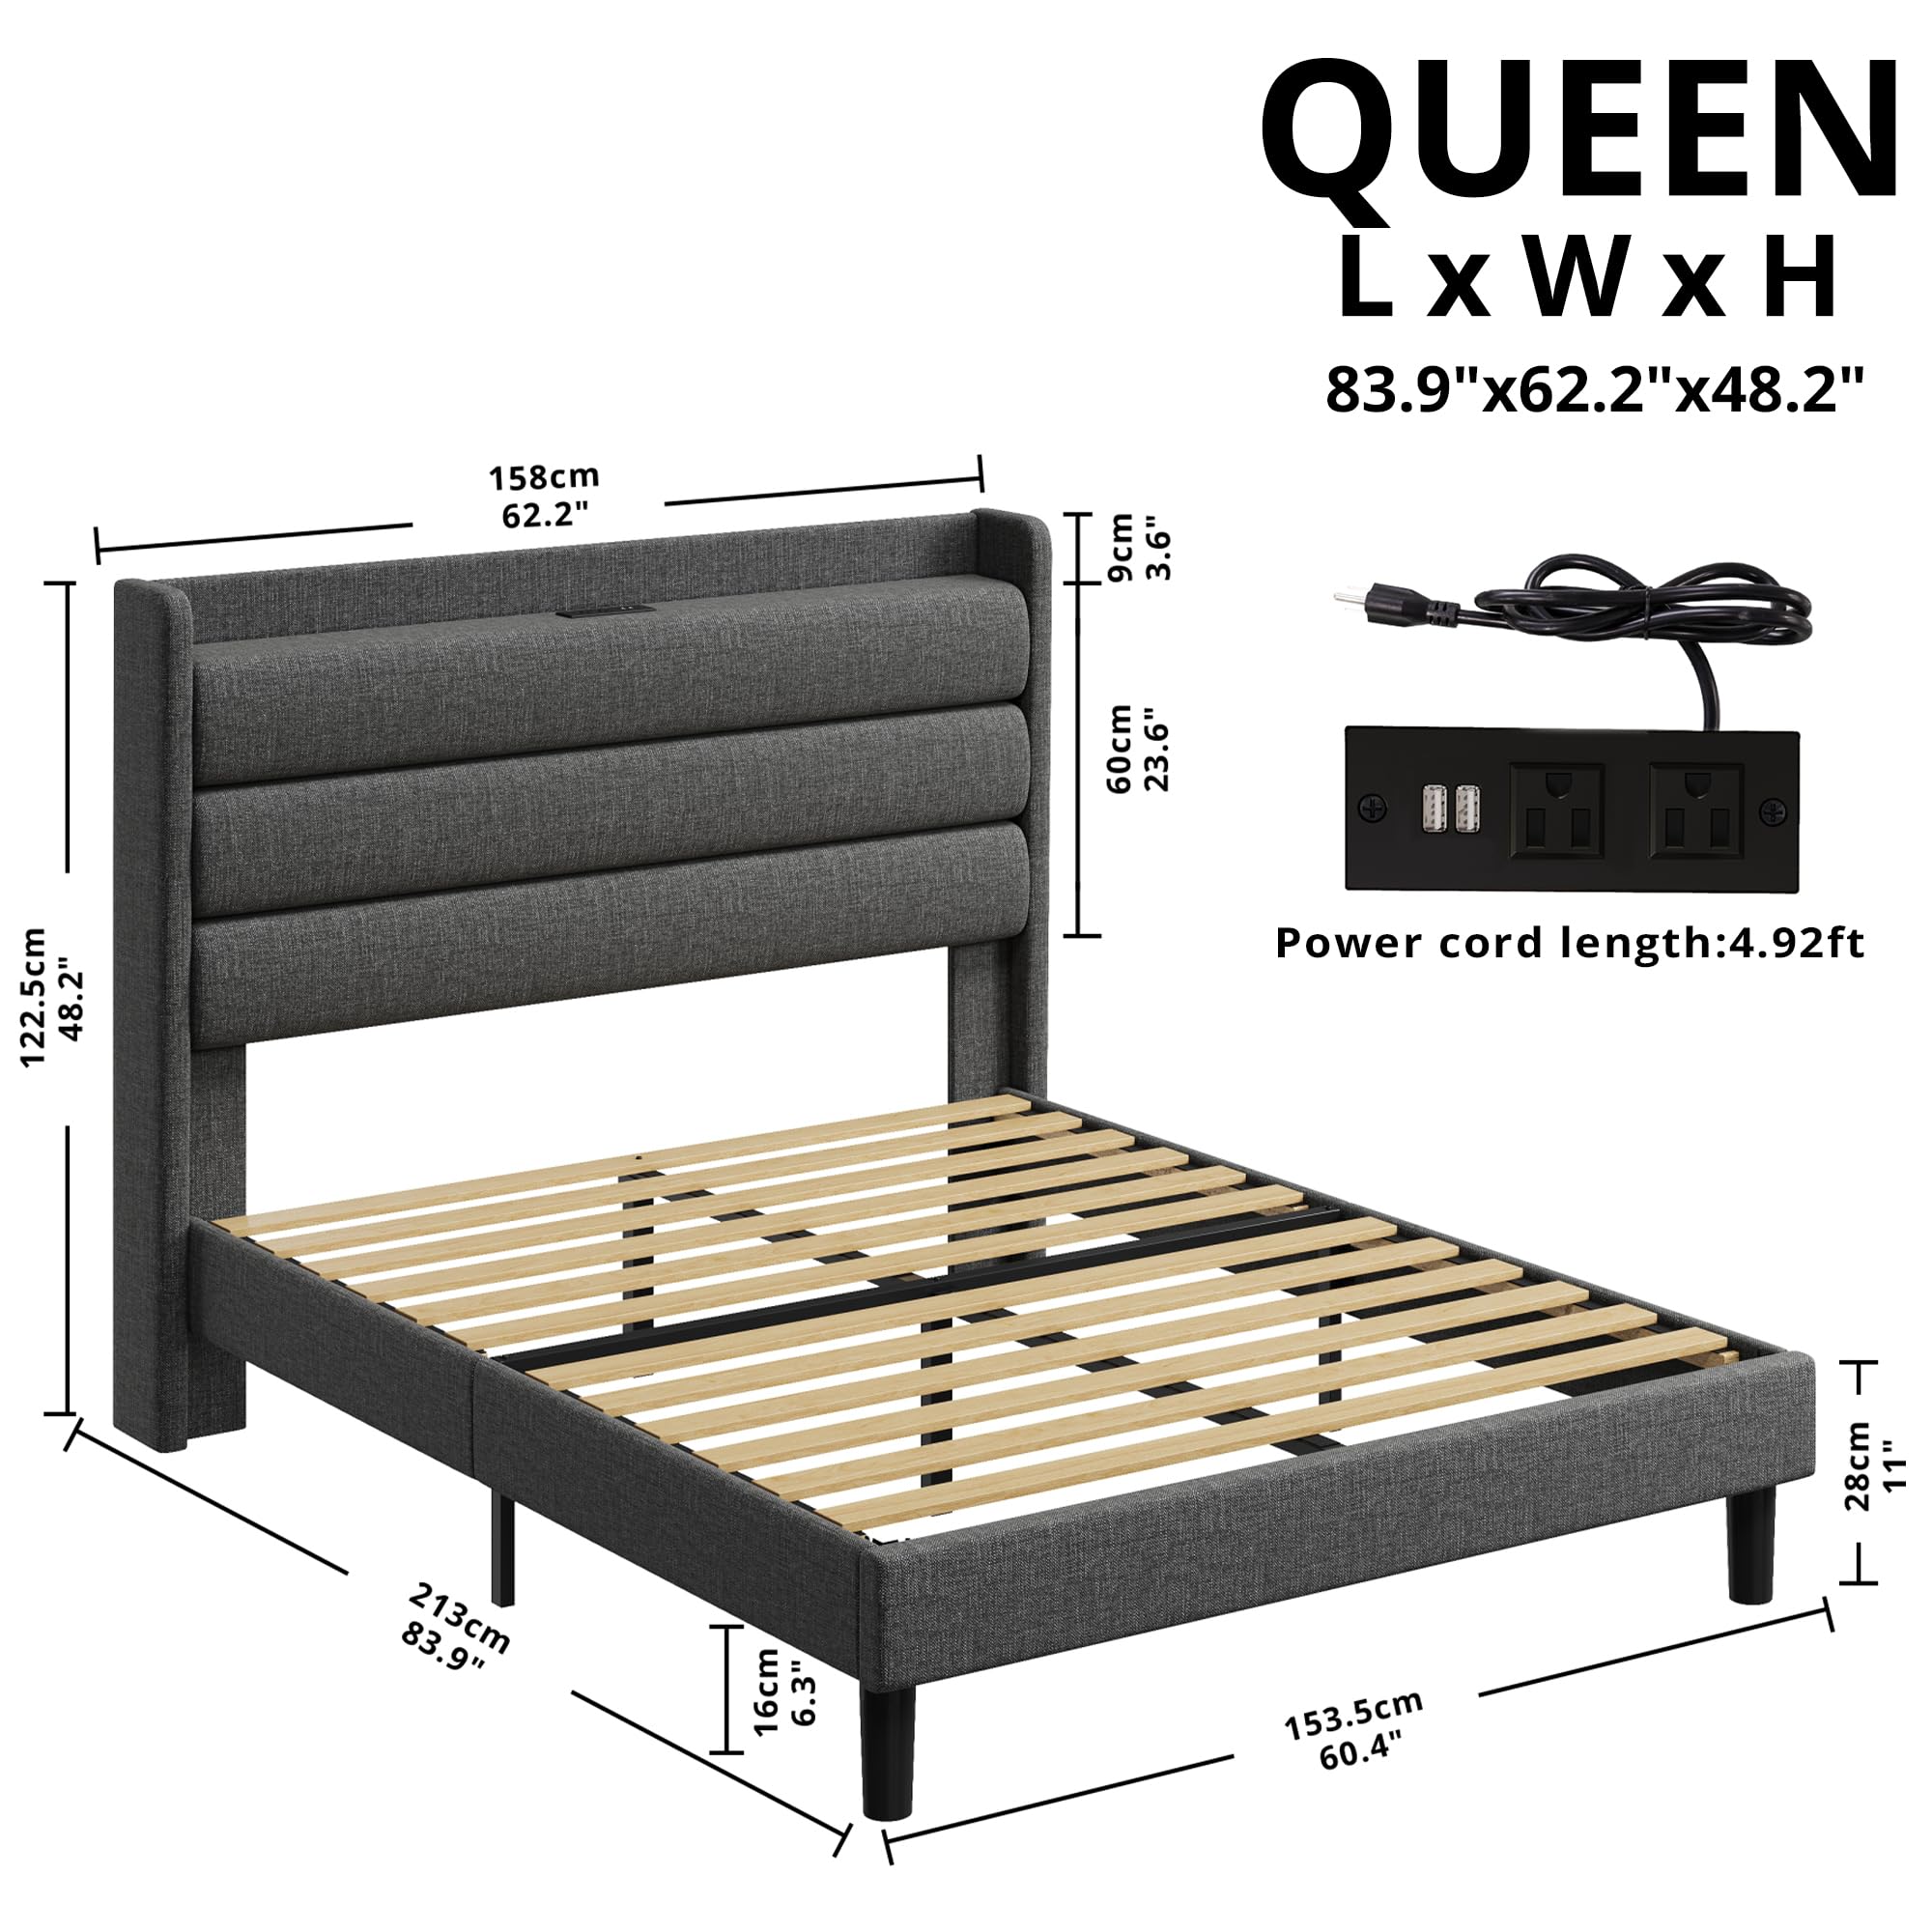 LIKIMIO Queen Size Bed Frame, Storage Headboard with Outlets, Sturdy and Stable, No Noise, No Box Springs Needed, Dark Gray